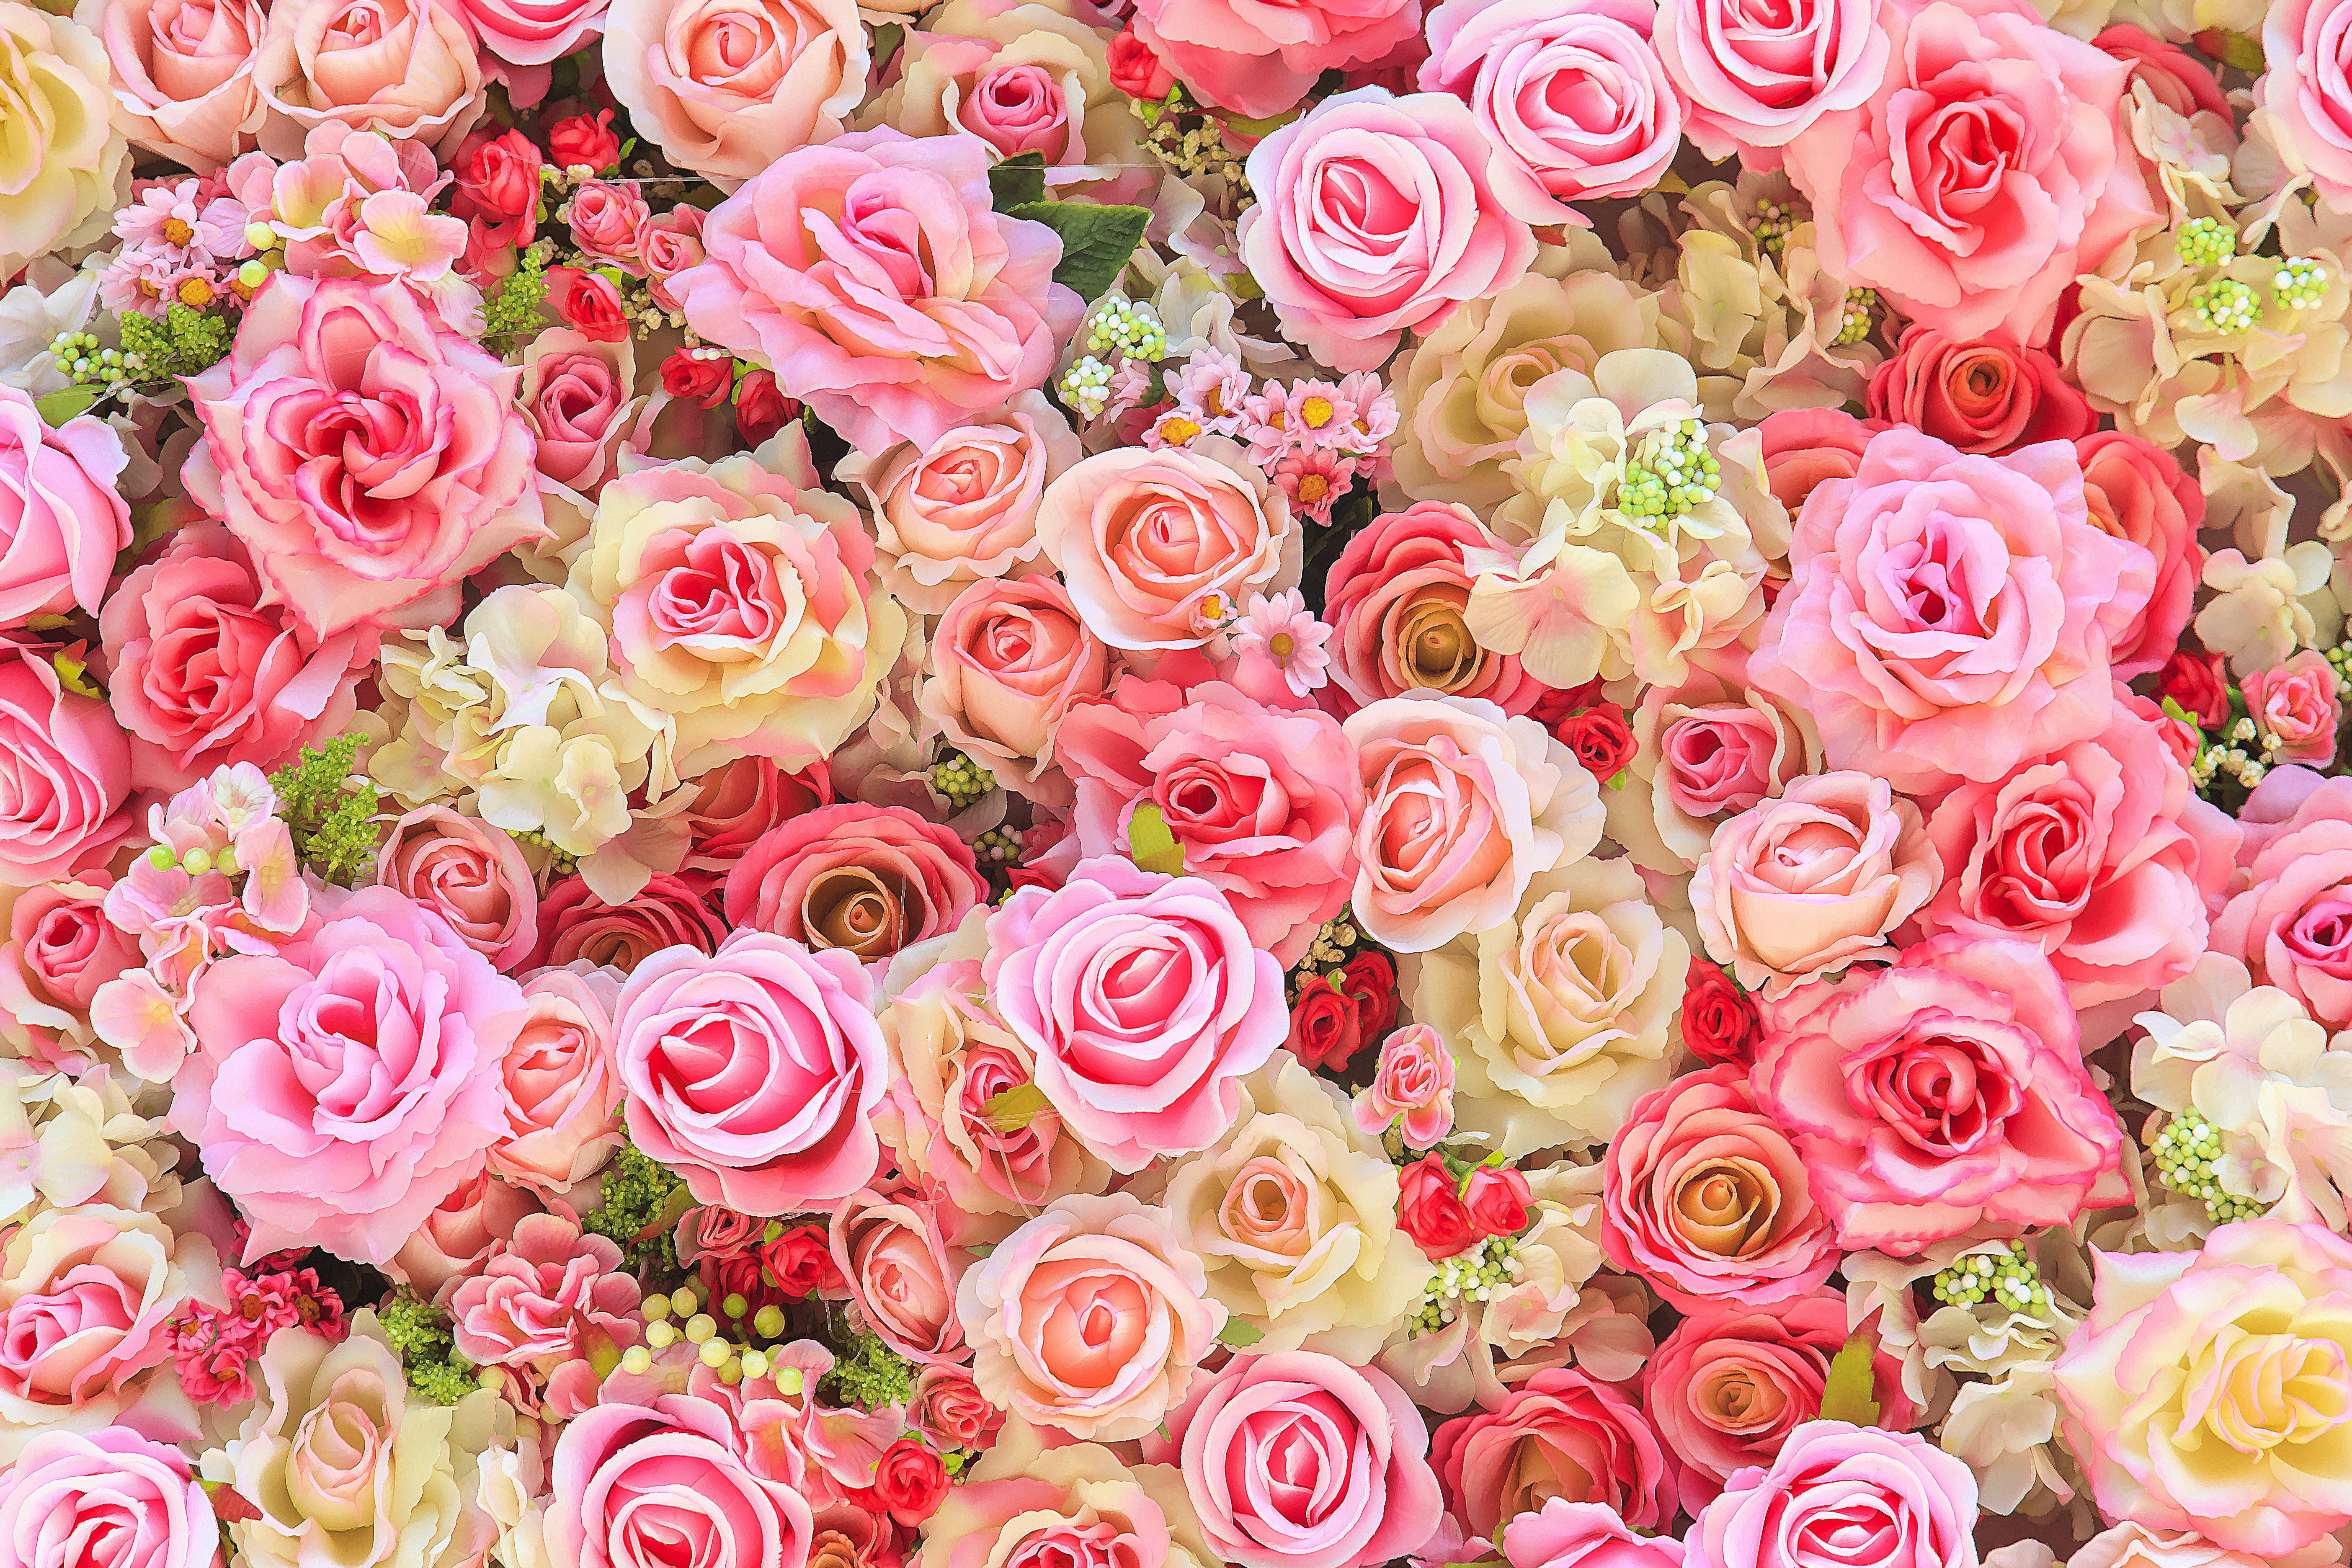 flowers, background, roses, colorful, pink, buds